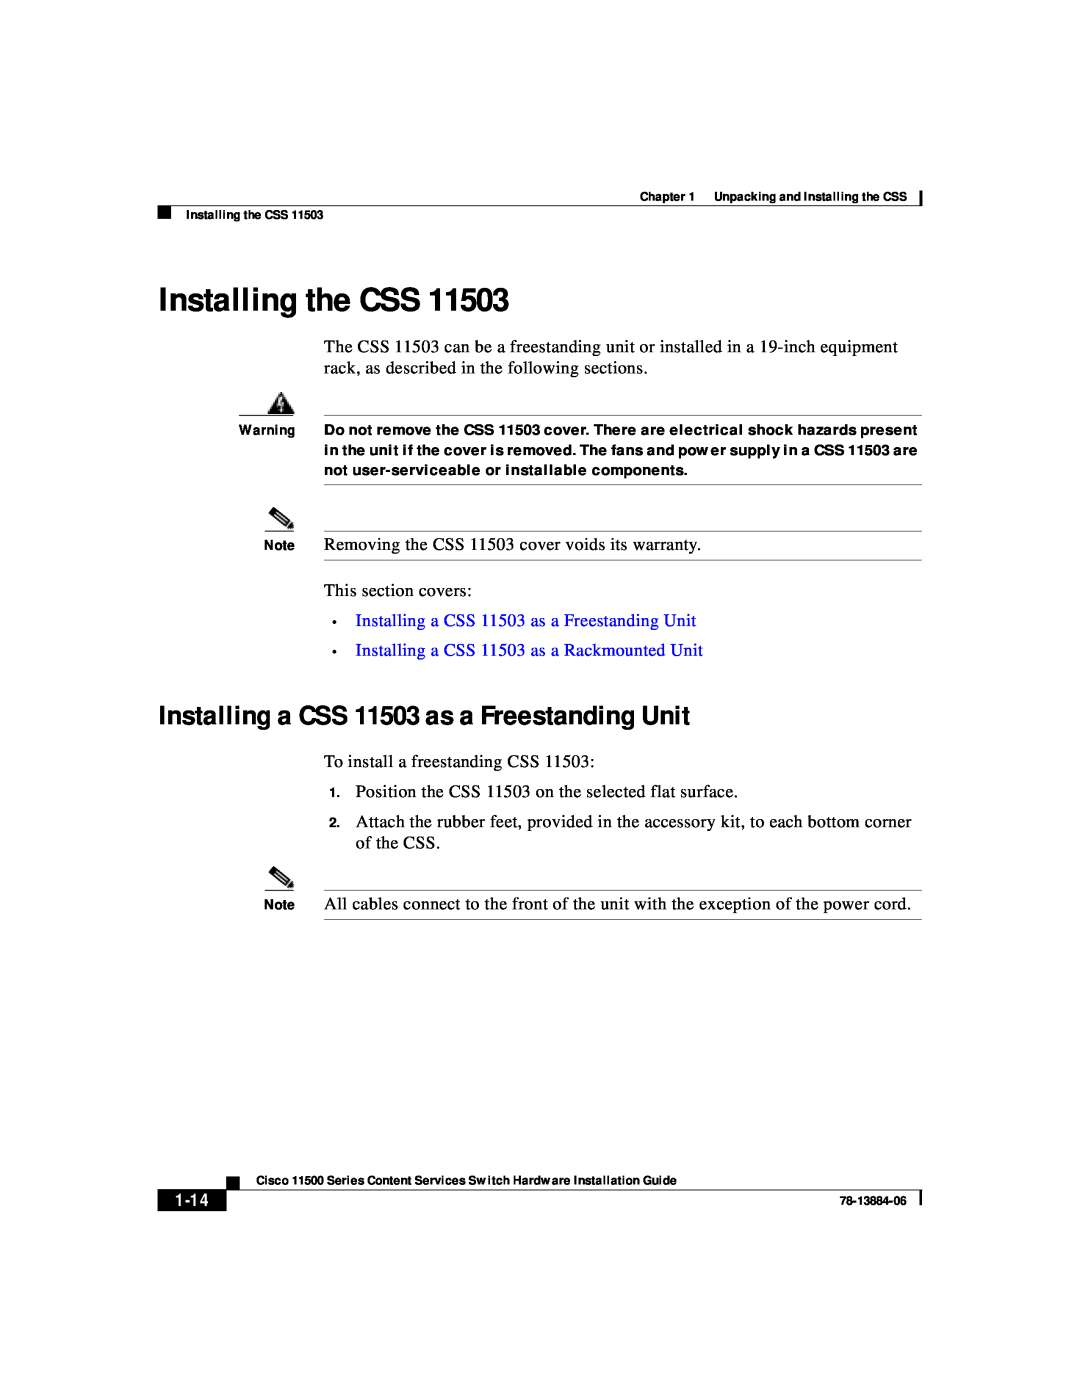 Cisco Systems 11500 Series manual Installing a CSS 11503 as a Freestanding Unit, Installing the CSS, 1-14 